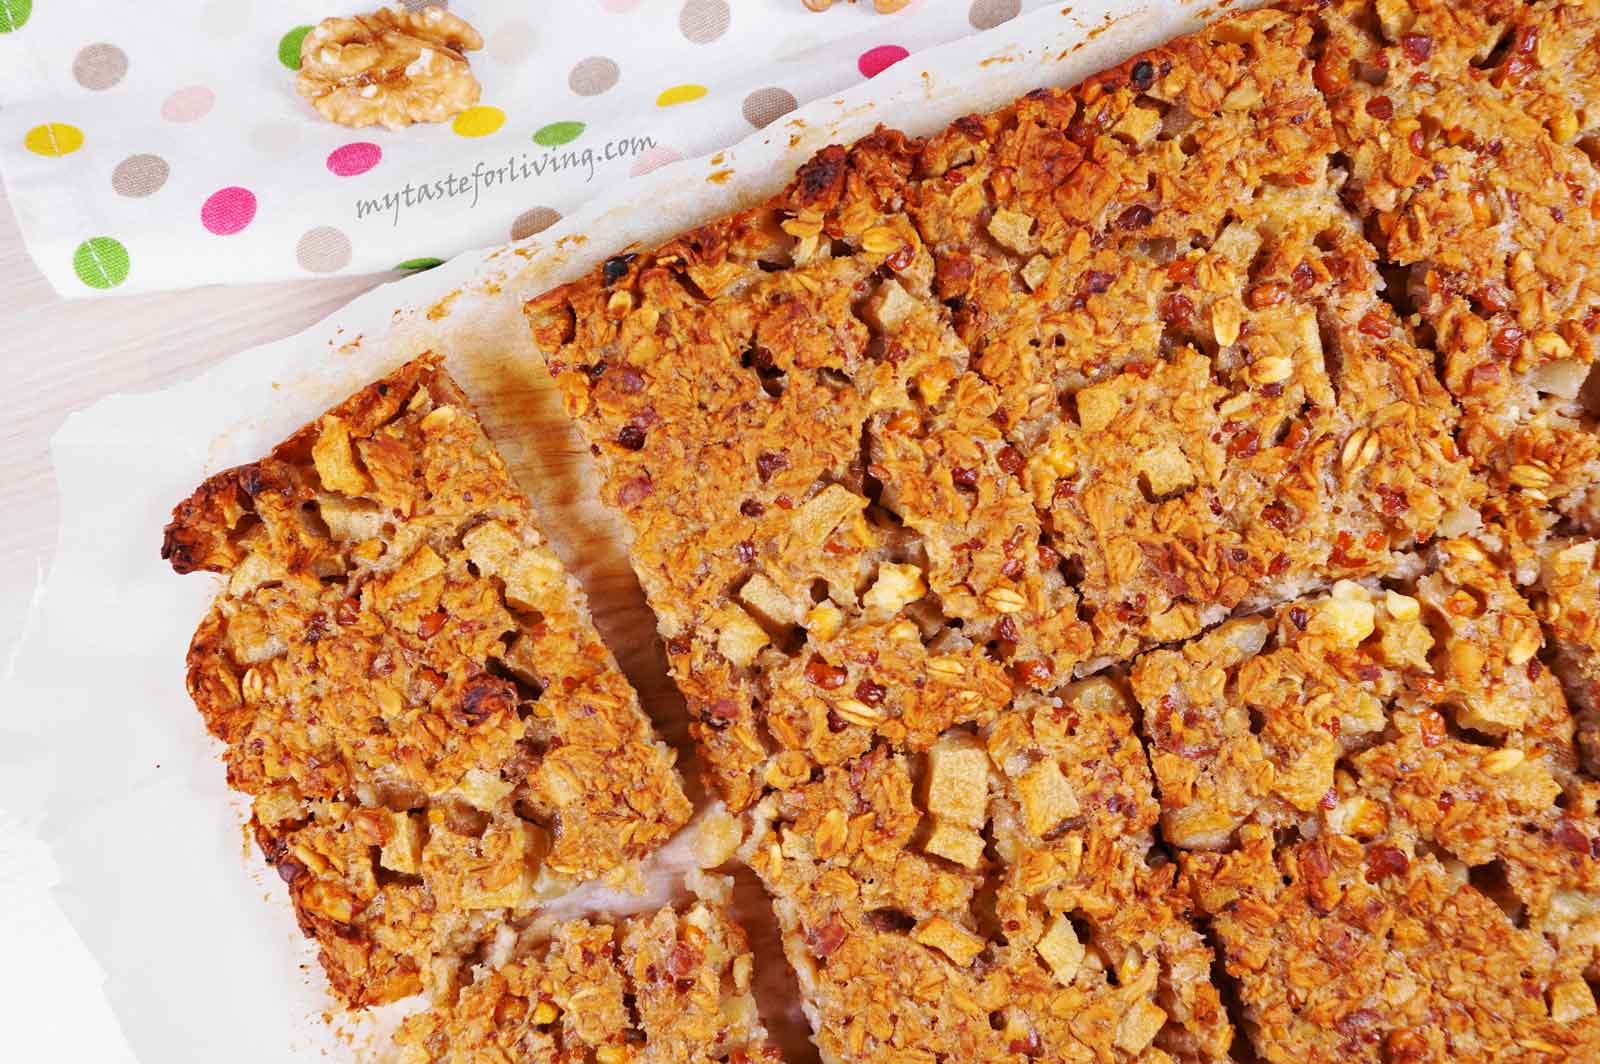 Bars prepared with old fashioned rolled oats, apple, walnuts, honey, cinnamon and cottage cheese, which will charge you with energy during the day!